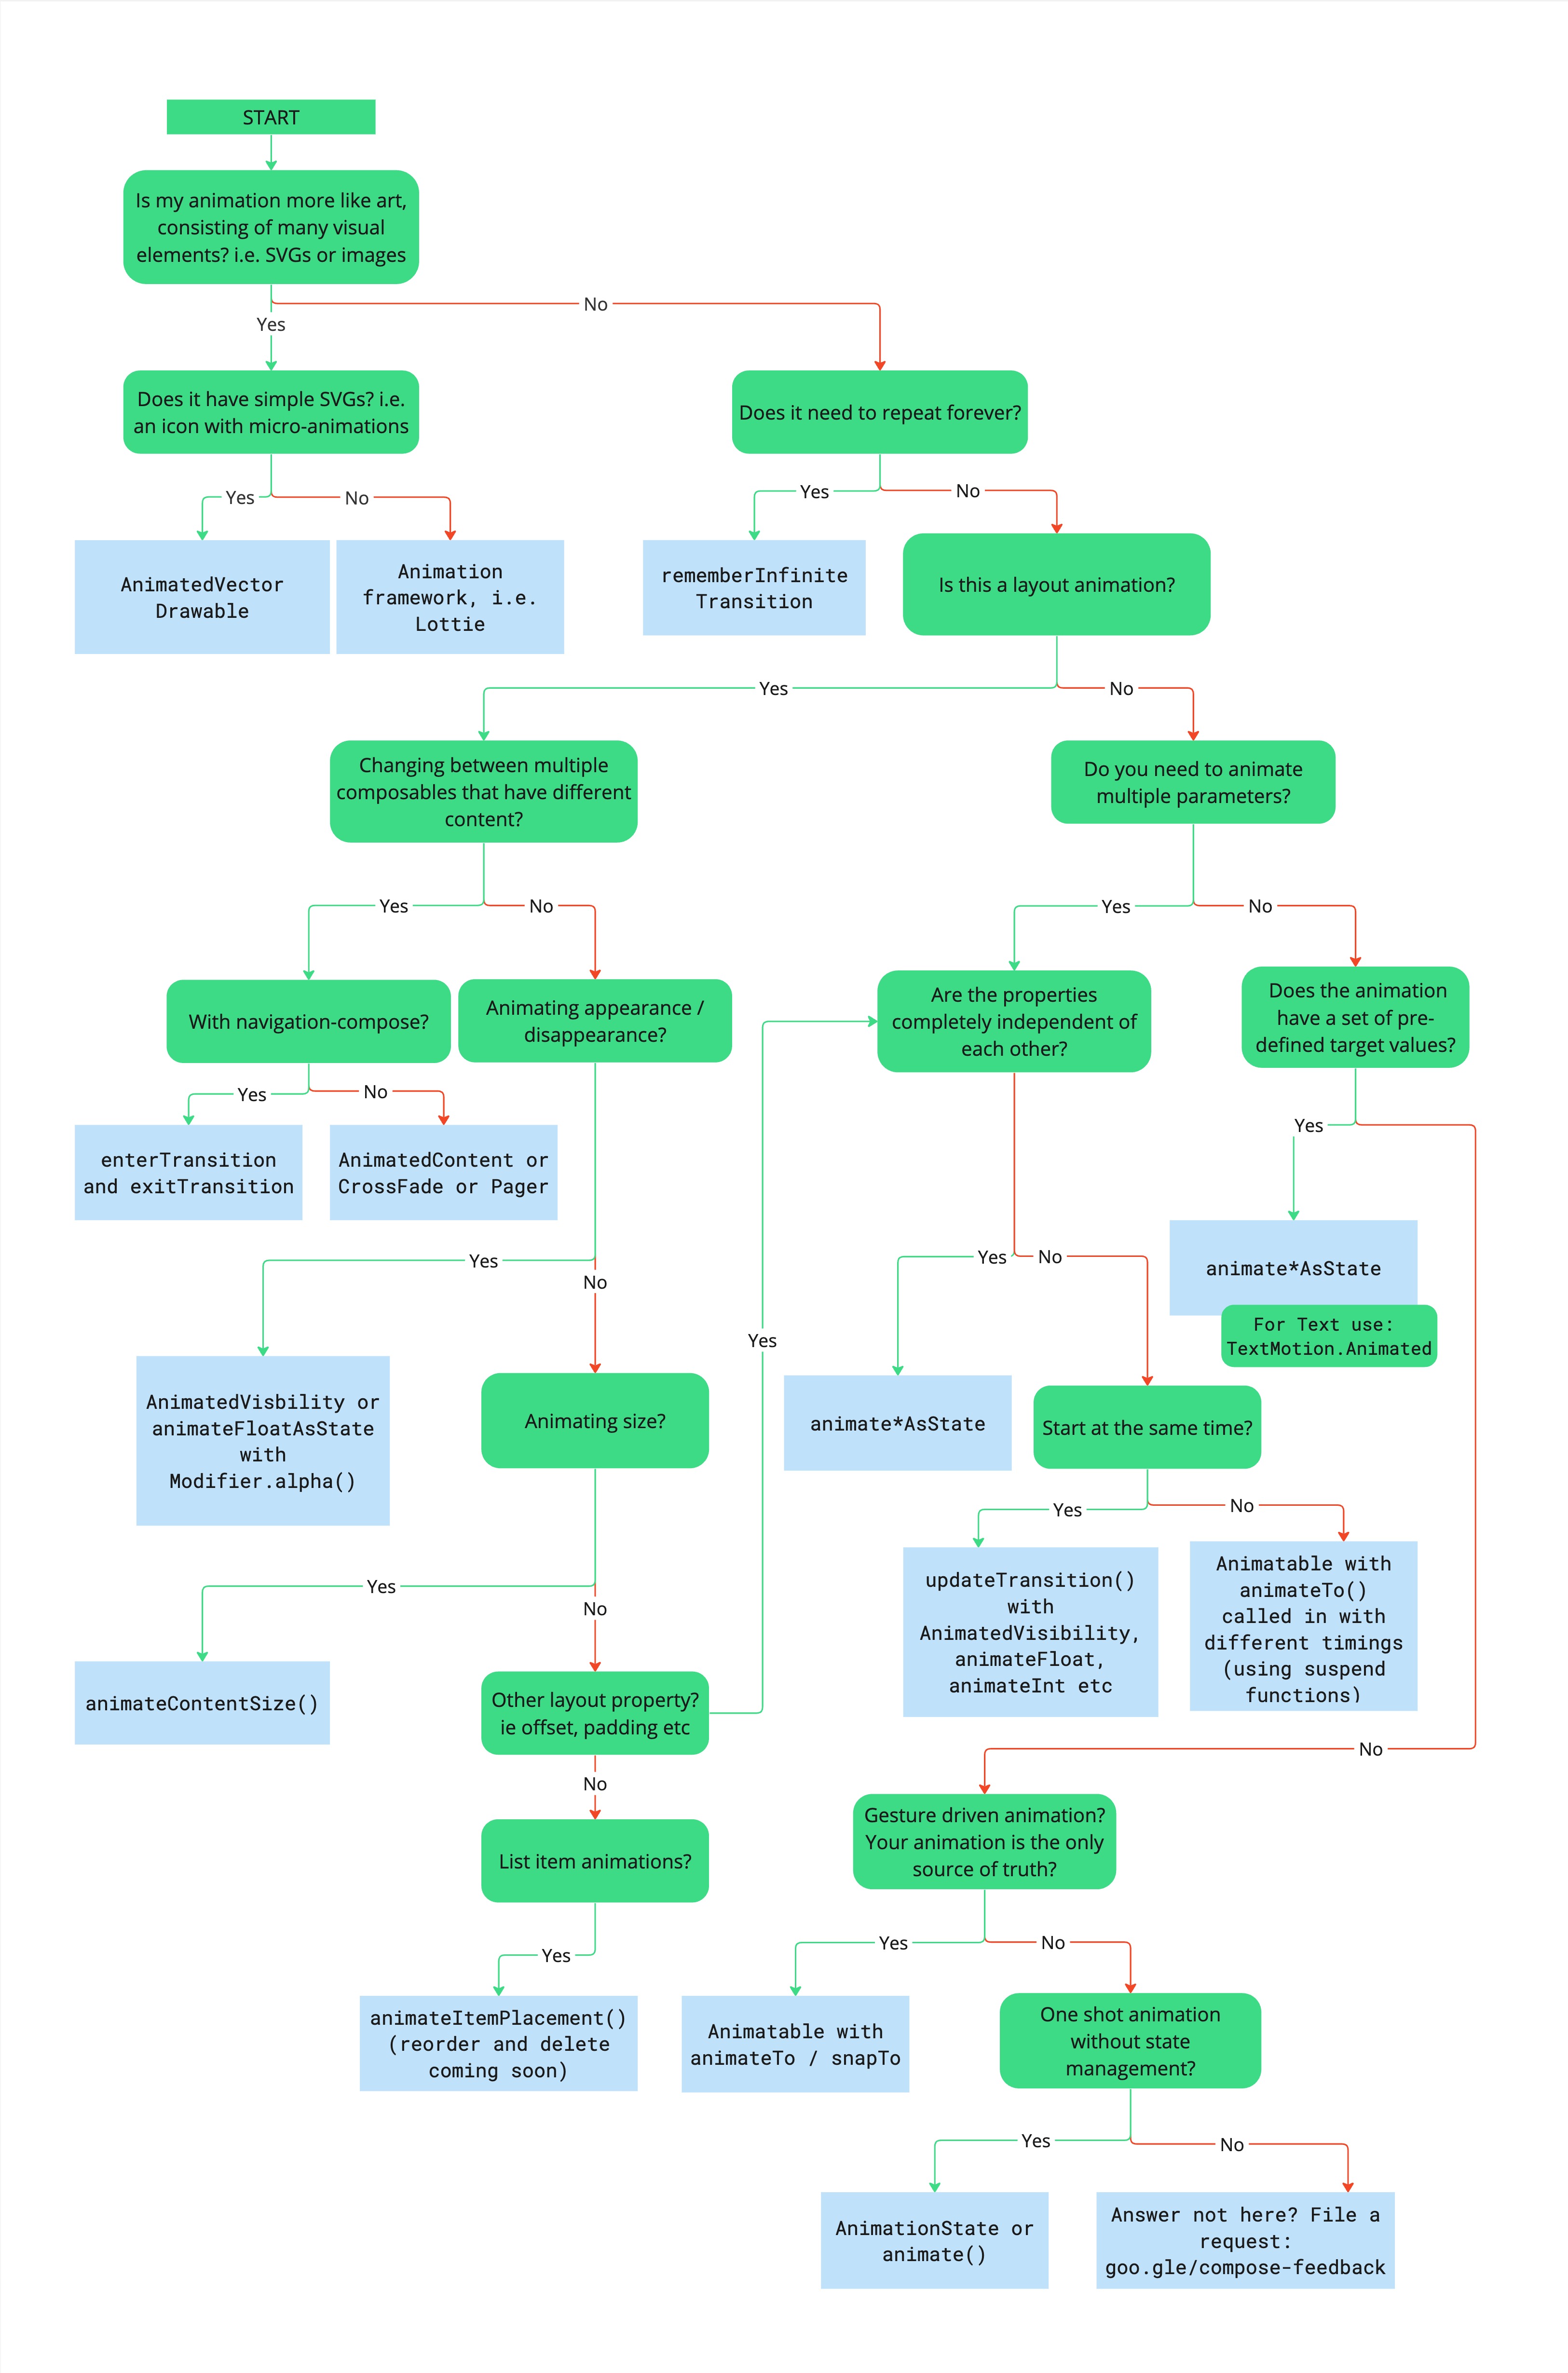 Flowchart describing the decision tree for choosing the appropriate animation
API